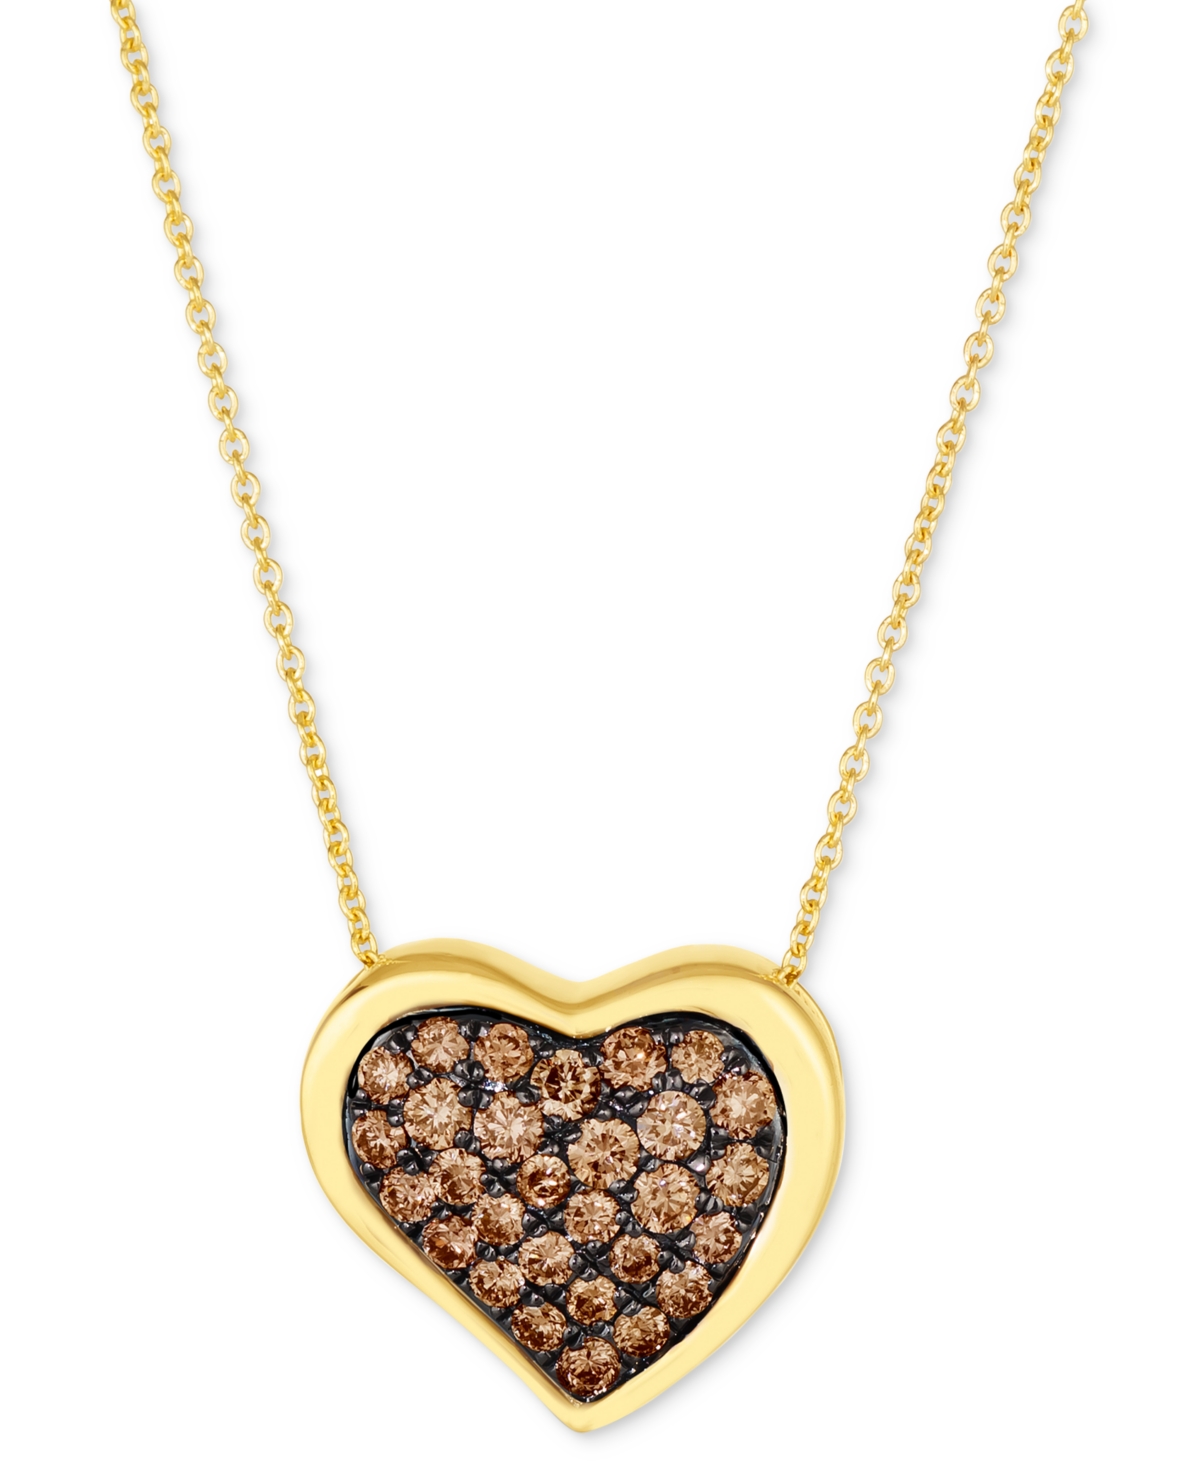 Godiva x Le Vian Chocolate Ganache Heart Pendant Necklace Featuring Chocolate Diamond (5/8 ct. t.w.) in 14k Gold (Also Available in Rose Gold)